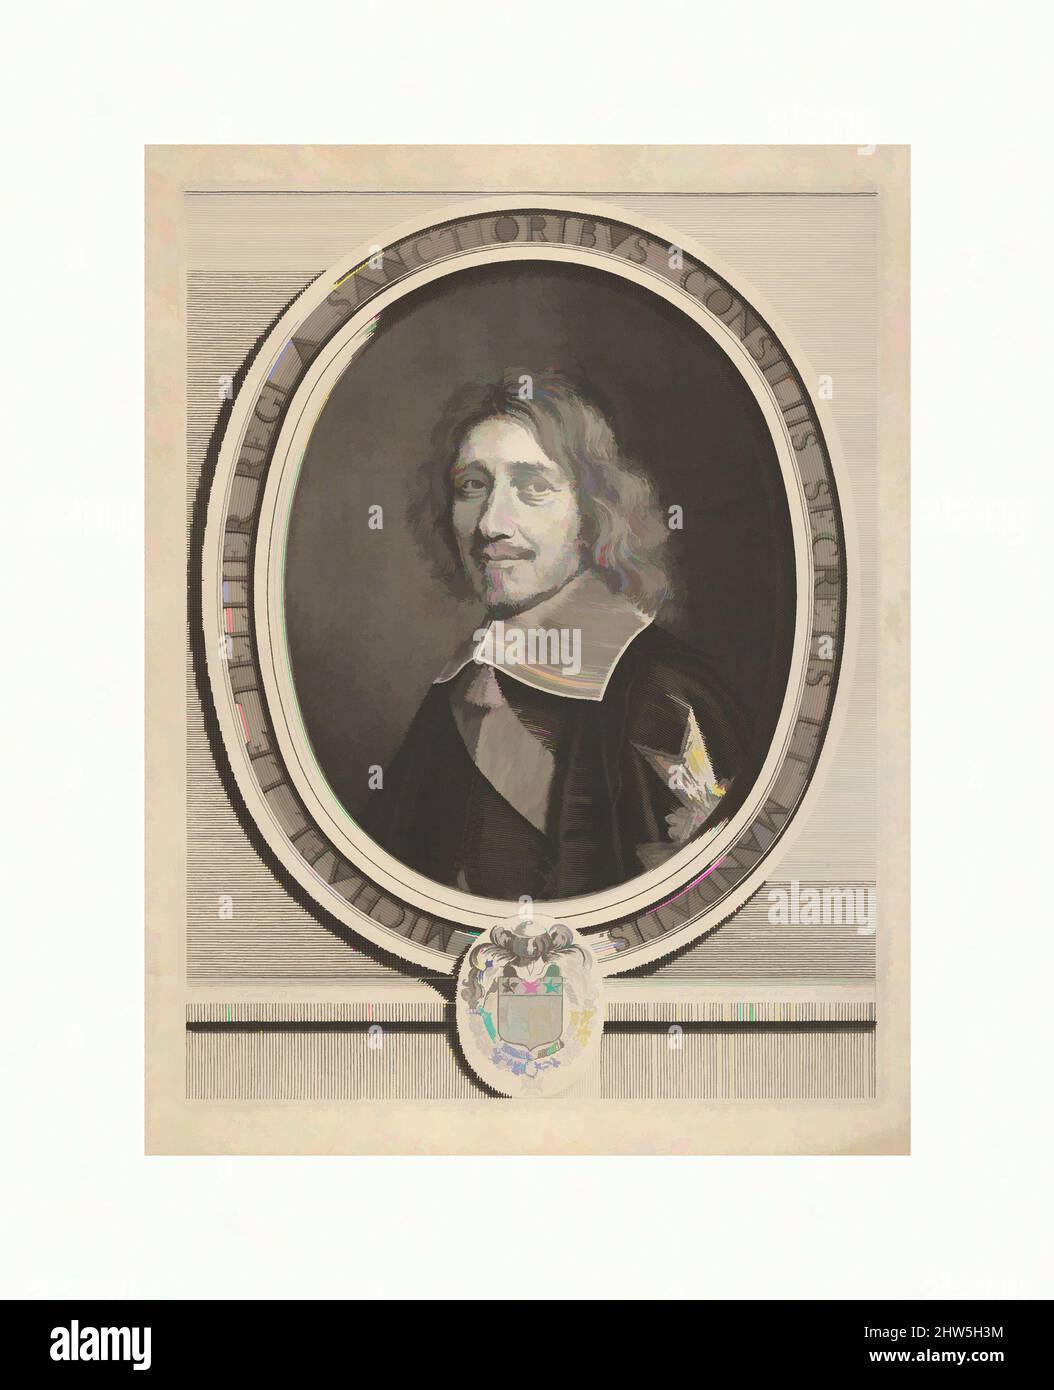 Art inspired by Chancelier Michel IV Le Tellier, ca. 1661, Engraving; second state of two (Petitjean & Wickert), Sheet: 14 3/4 × 11 1/4 in. (37.5 × 28.5 cm), Prints, Robert Nanteuil (French, Reims 1623–1678 Paris, Classic works modernized by Artotop with a splash of modernity. Shapes, color and value, eye-catching visual impact on art. Emotions through freedom of artworks in a contemporary way. A timeless message pursuing a wildly creative new direction. Artists turning to the digital medium and creating the Artotop NFT Stock Photo